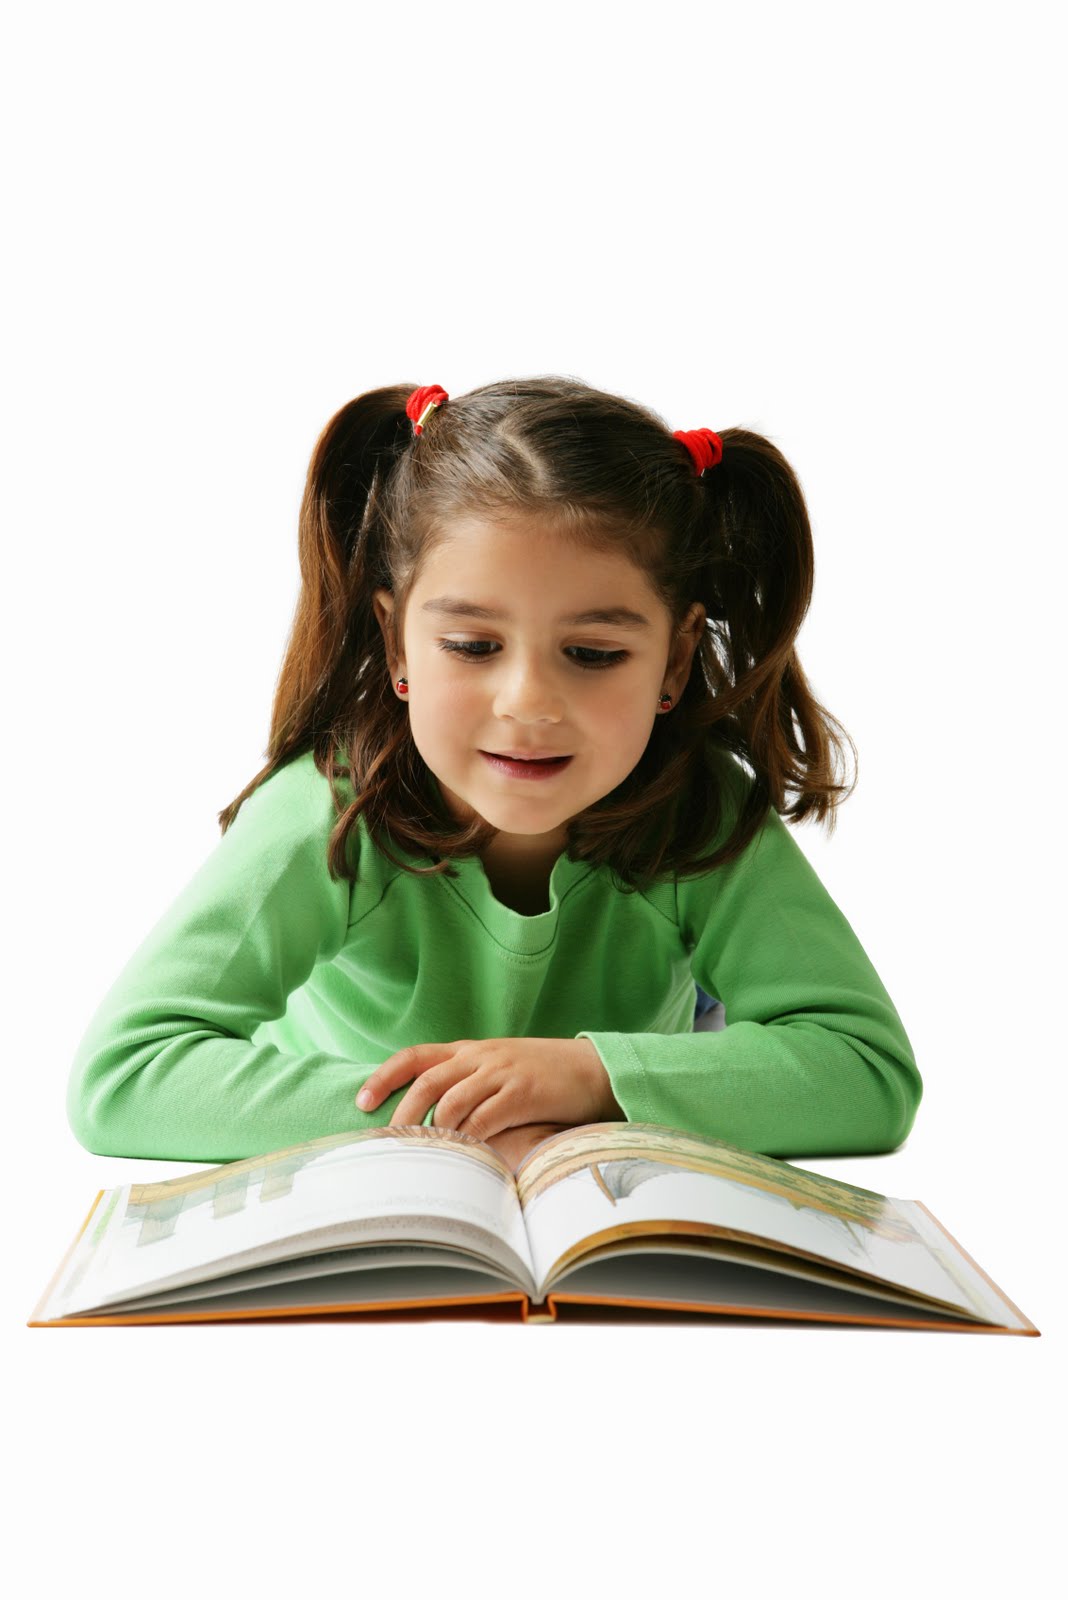 little girl reading a book clipart - photo #33